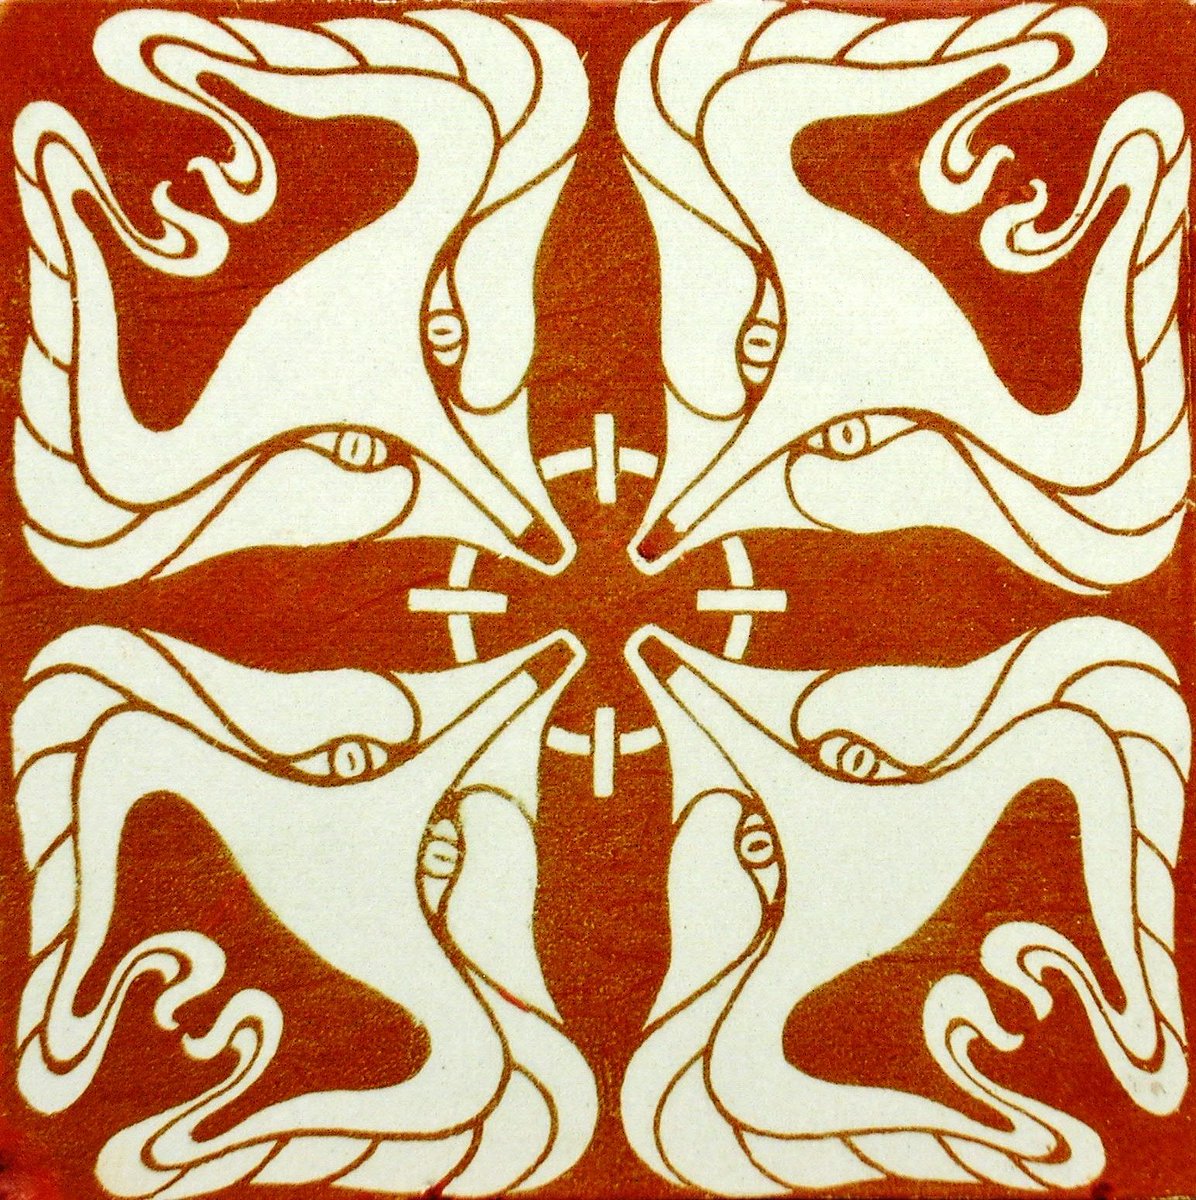 Art Nouveau tile from c. 1895 with four stylized fox heads by German painter and graphic designer Otto Eckmann (1865-1902).